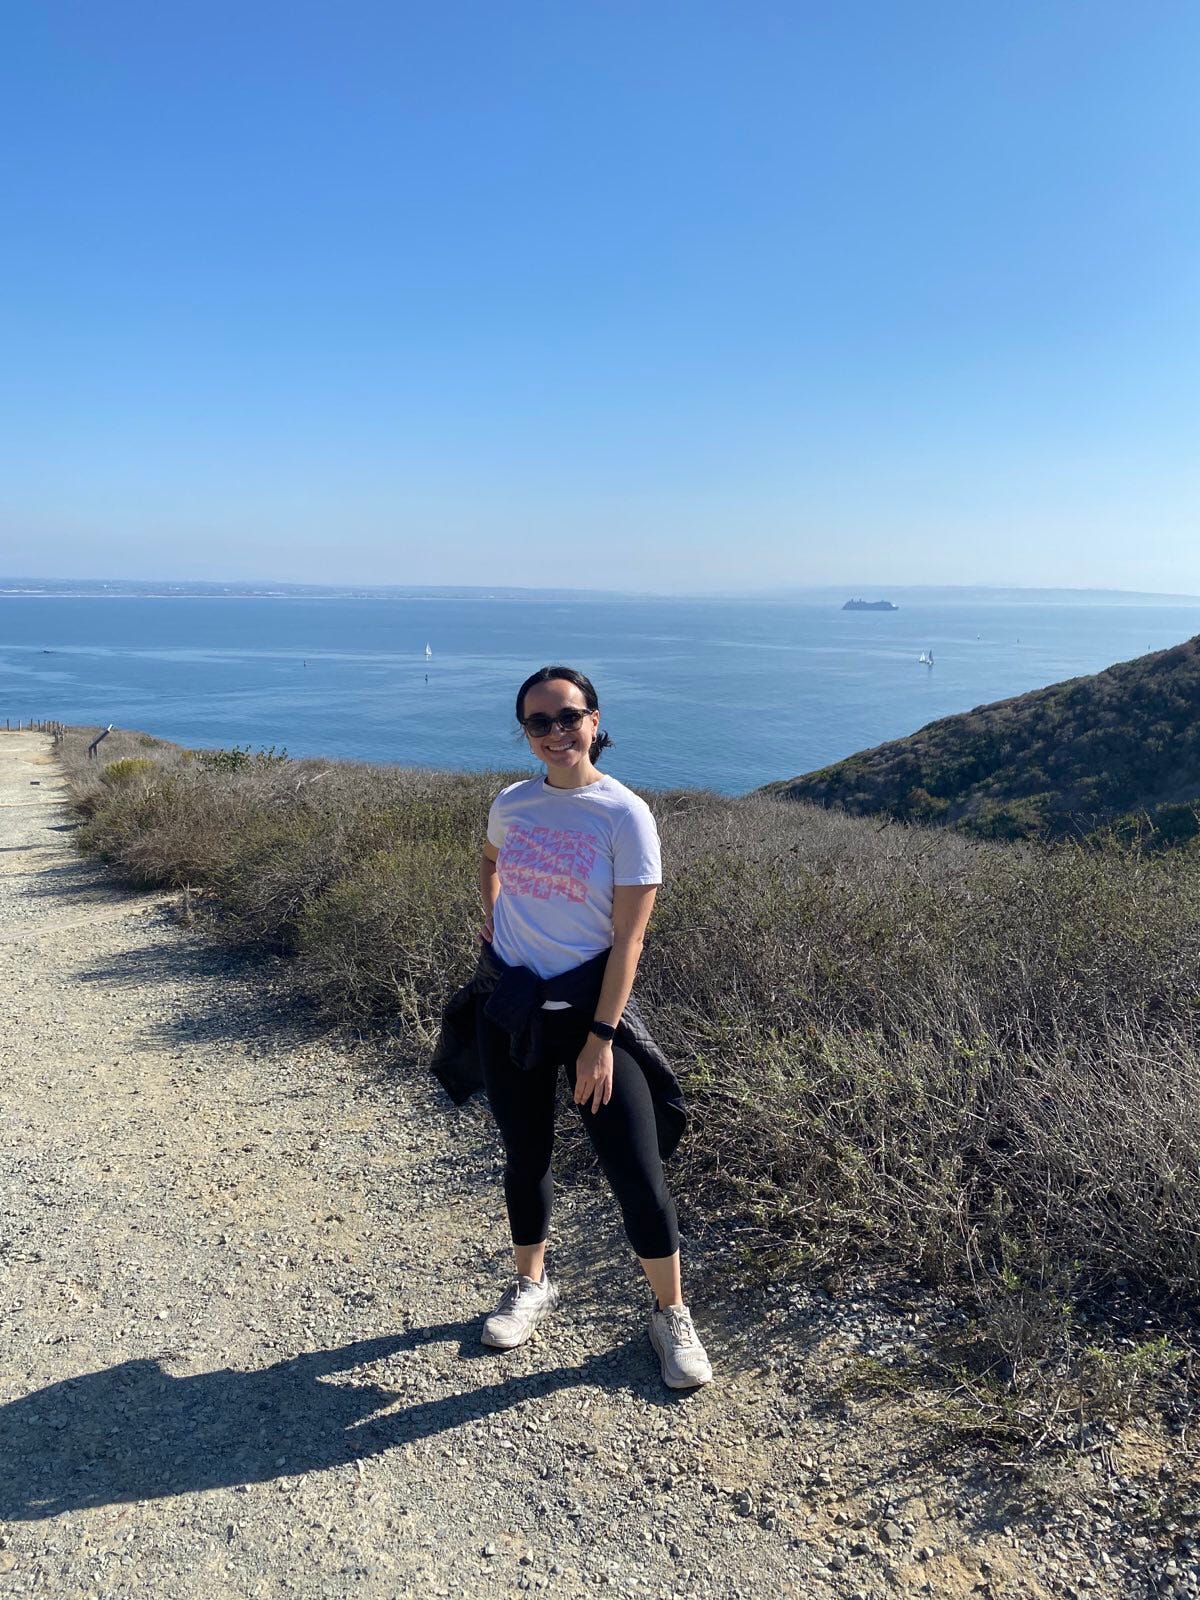 Alana stands in the middle of the photo, smiling and in workout gear. She's standing on a gravel and dirt path with brush next to her. Behind her is a full view of the sky and ocean.